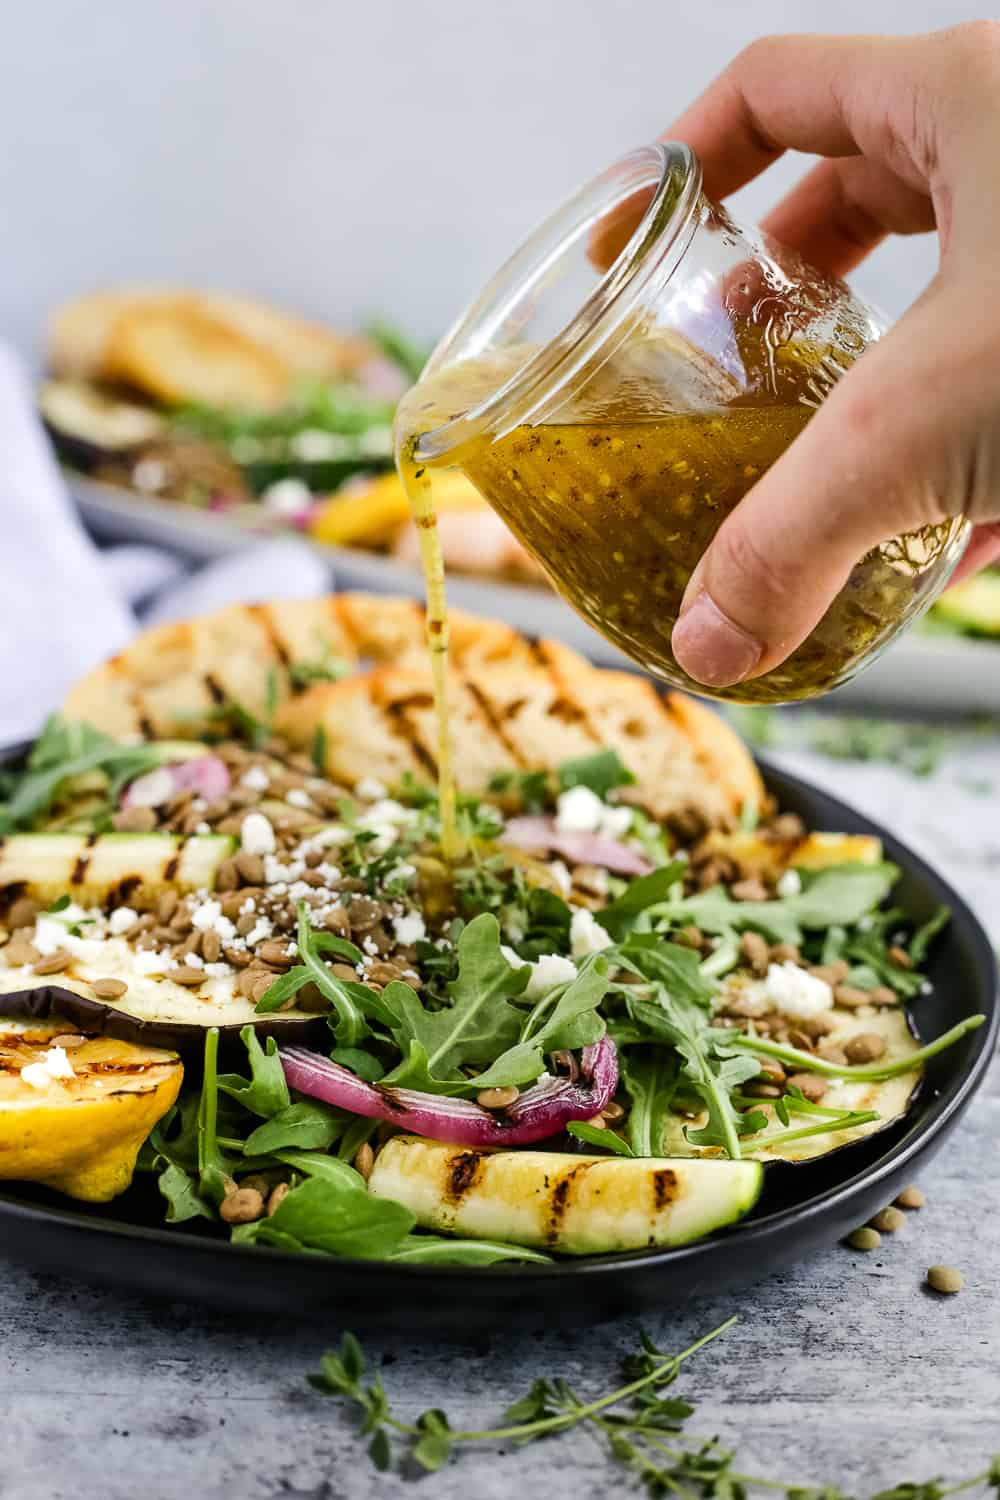 A woman's hand holds a small glass jar full of a honey mustard vinaigrette salad dressing, and lightly pours it over a prepared salad on a black ceramic salad plate